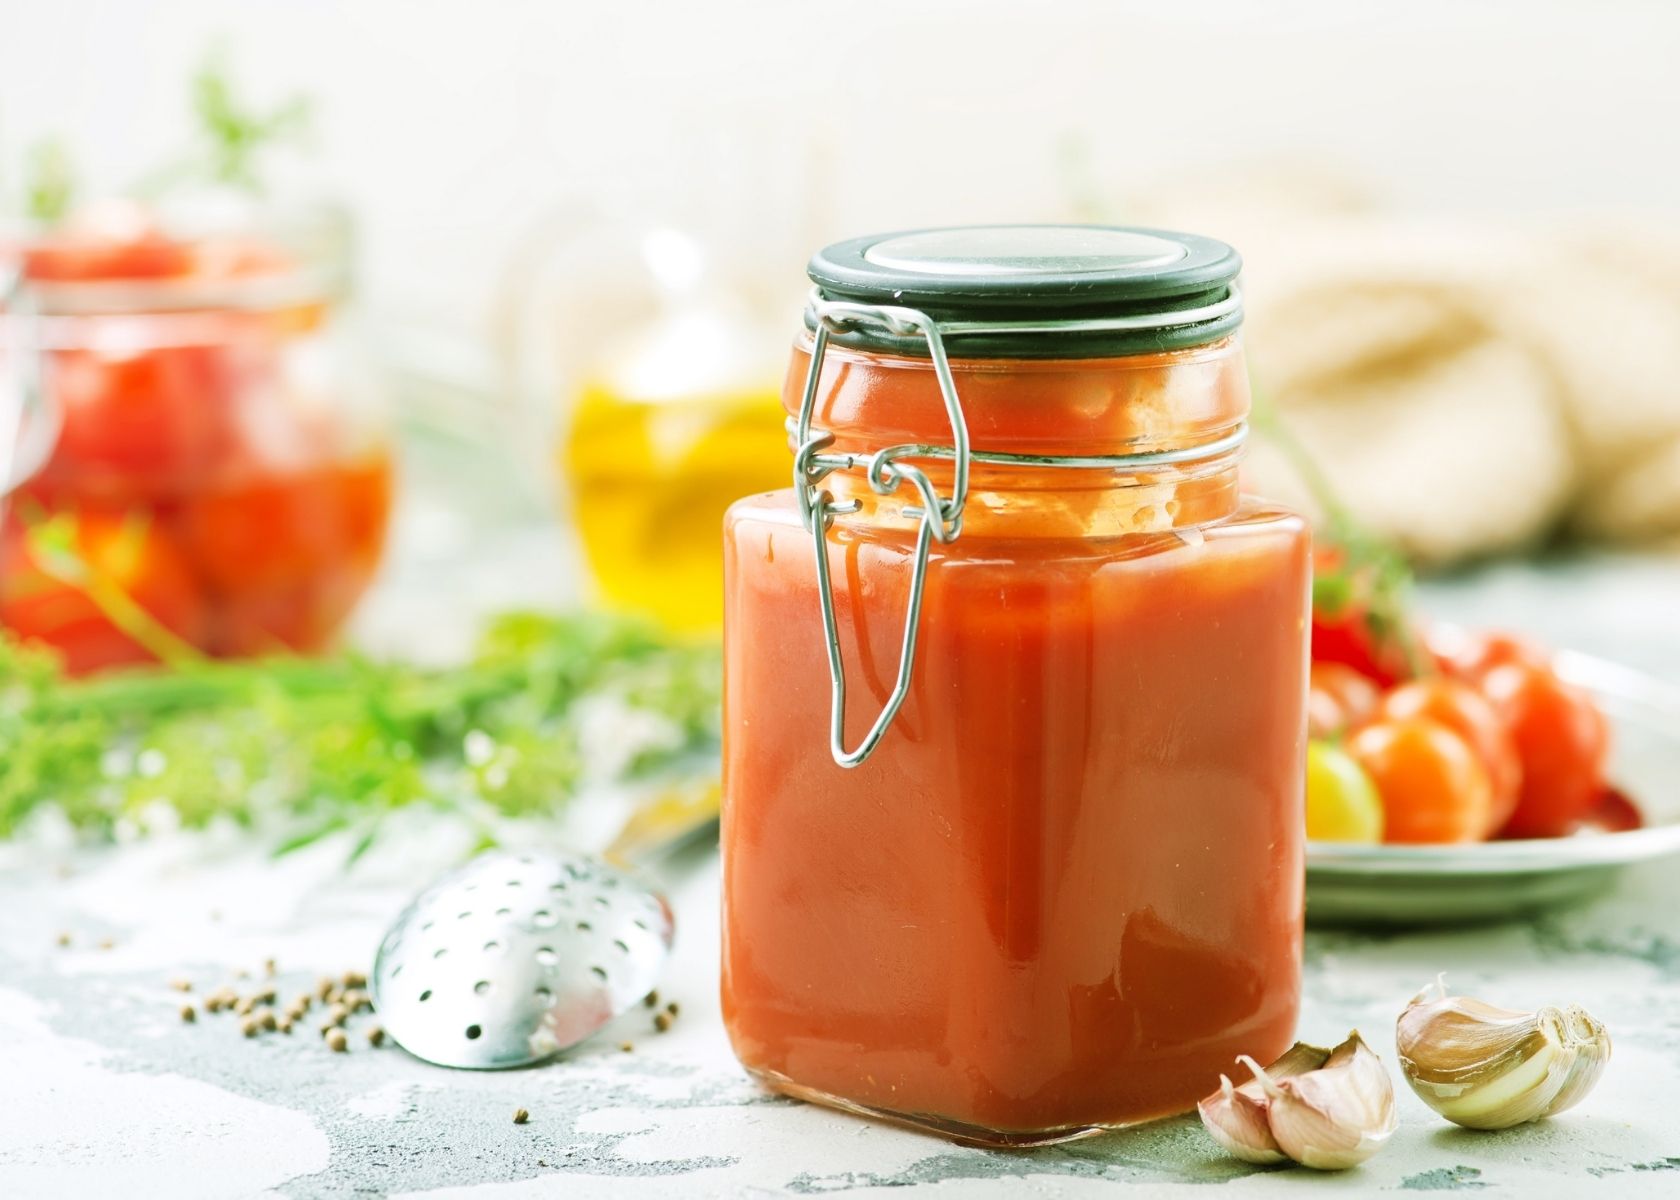 Homemade ketchup in glass canister next to garlic cloves and fresh tomatoes.